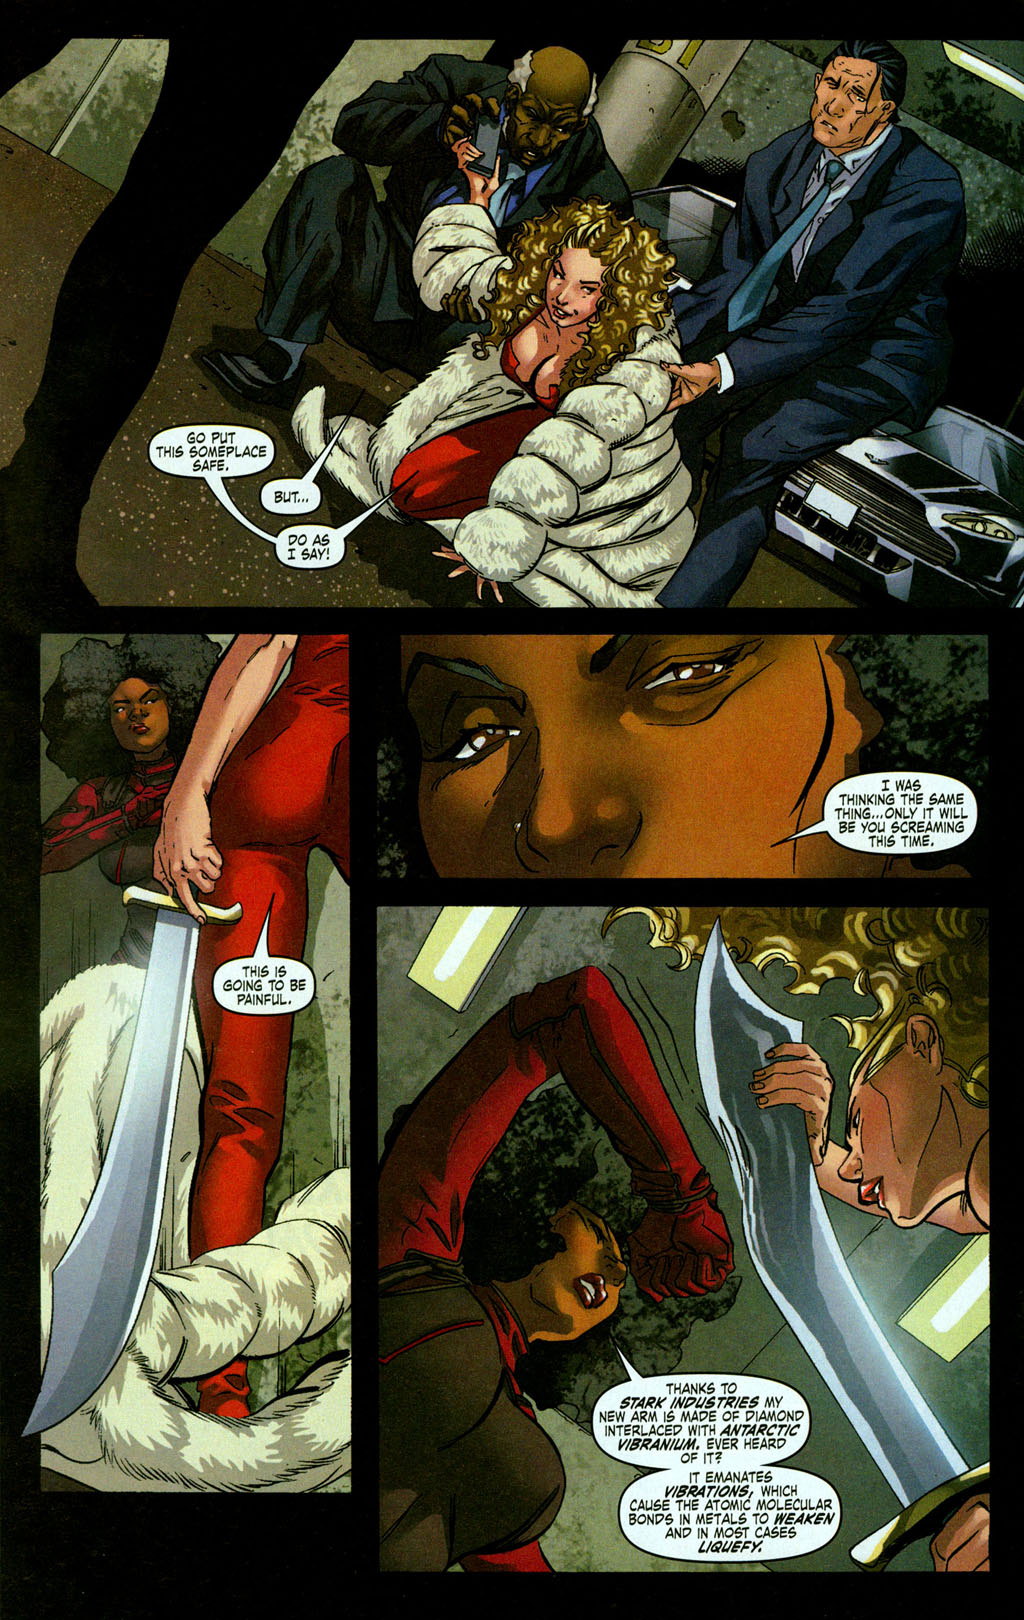 Is anything stronger than Adamantium? Misty Knight’s arm is stronger than Adamantium.